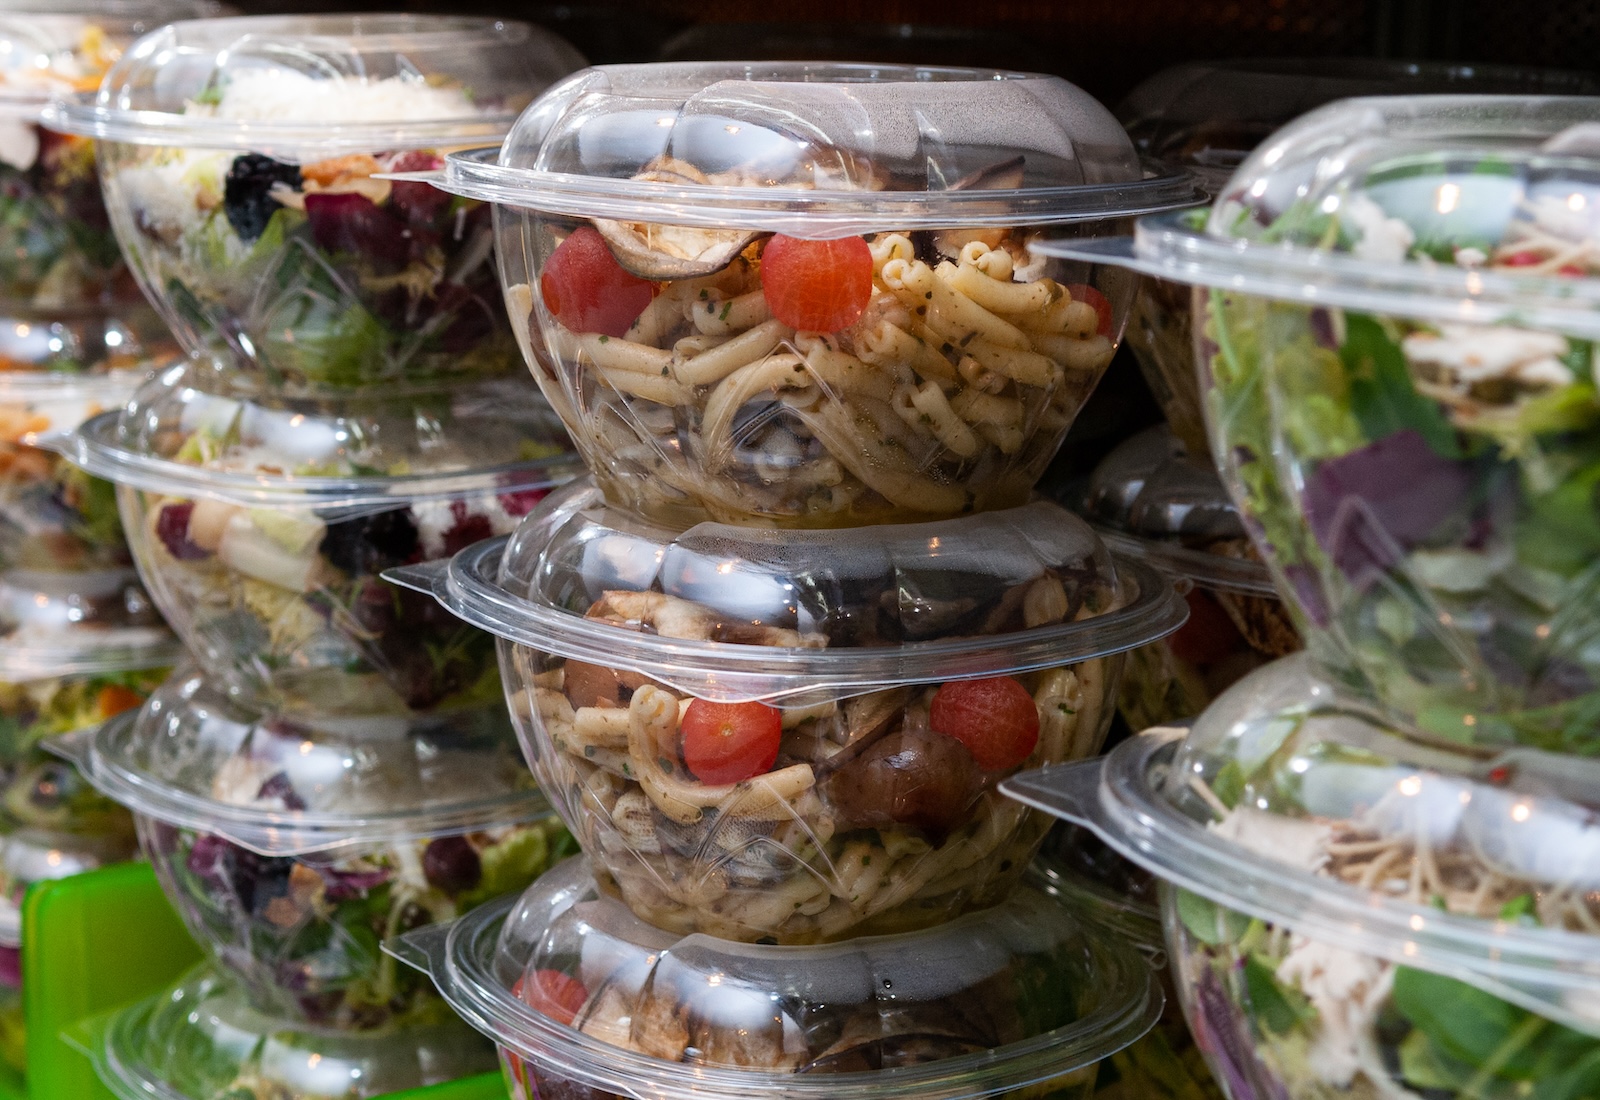 Salads packed in plastic clamshells